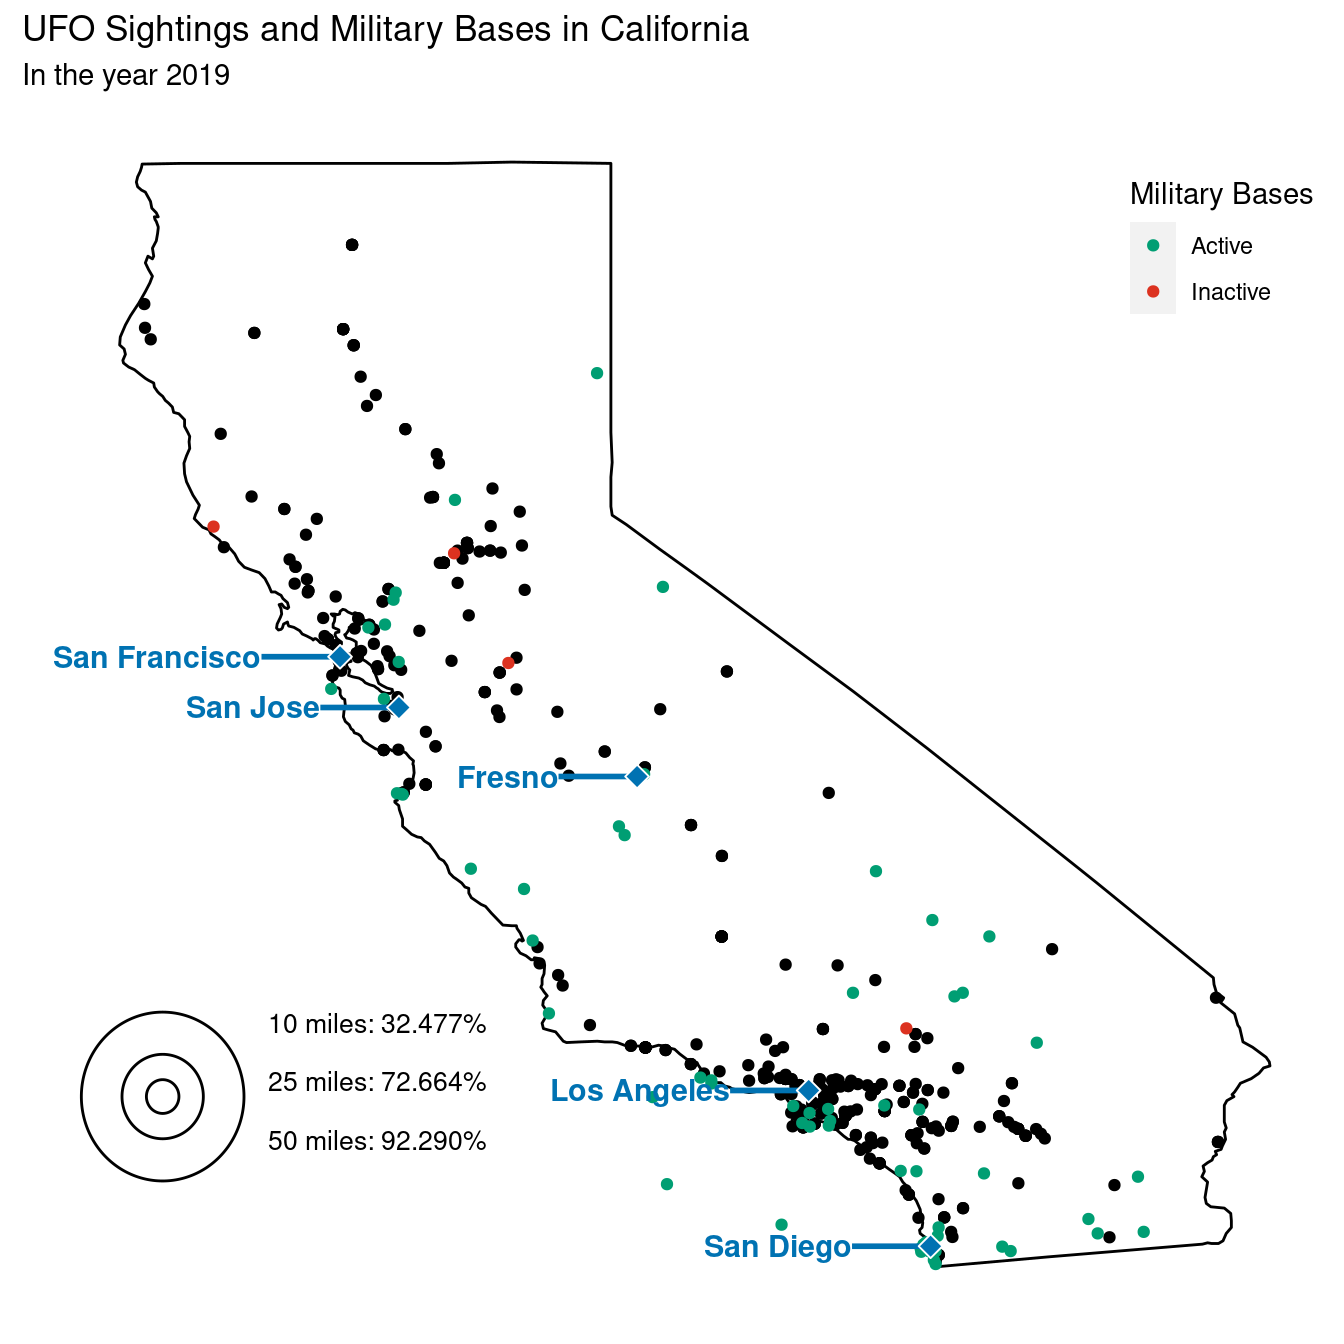 Distribution of UFO Sightings and Military Bases in California